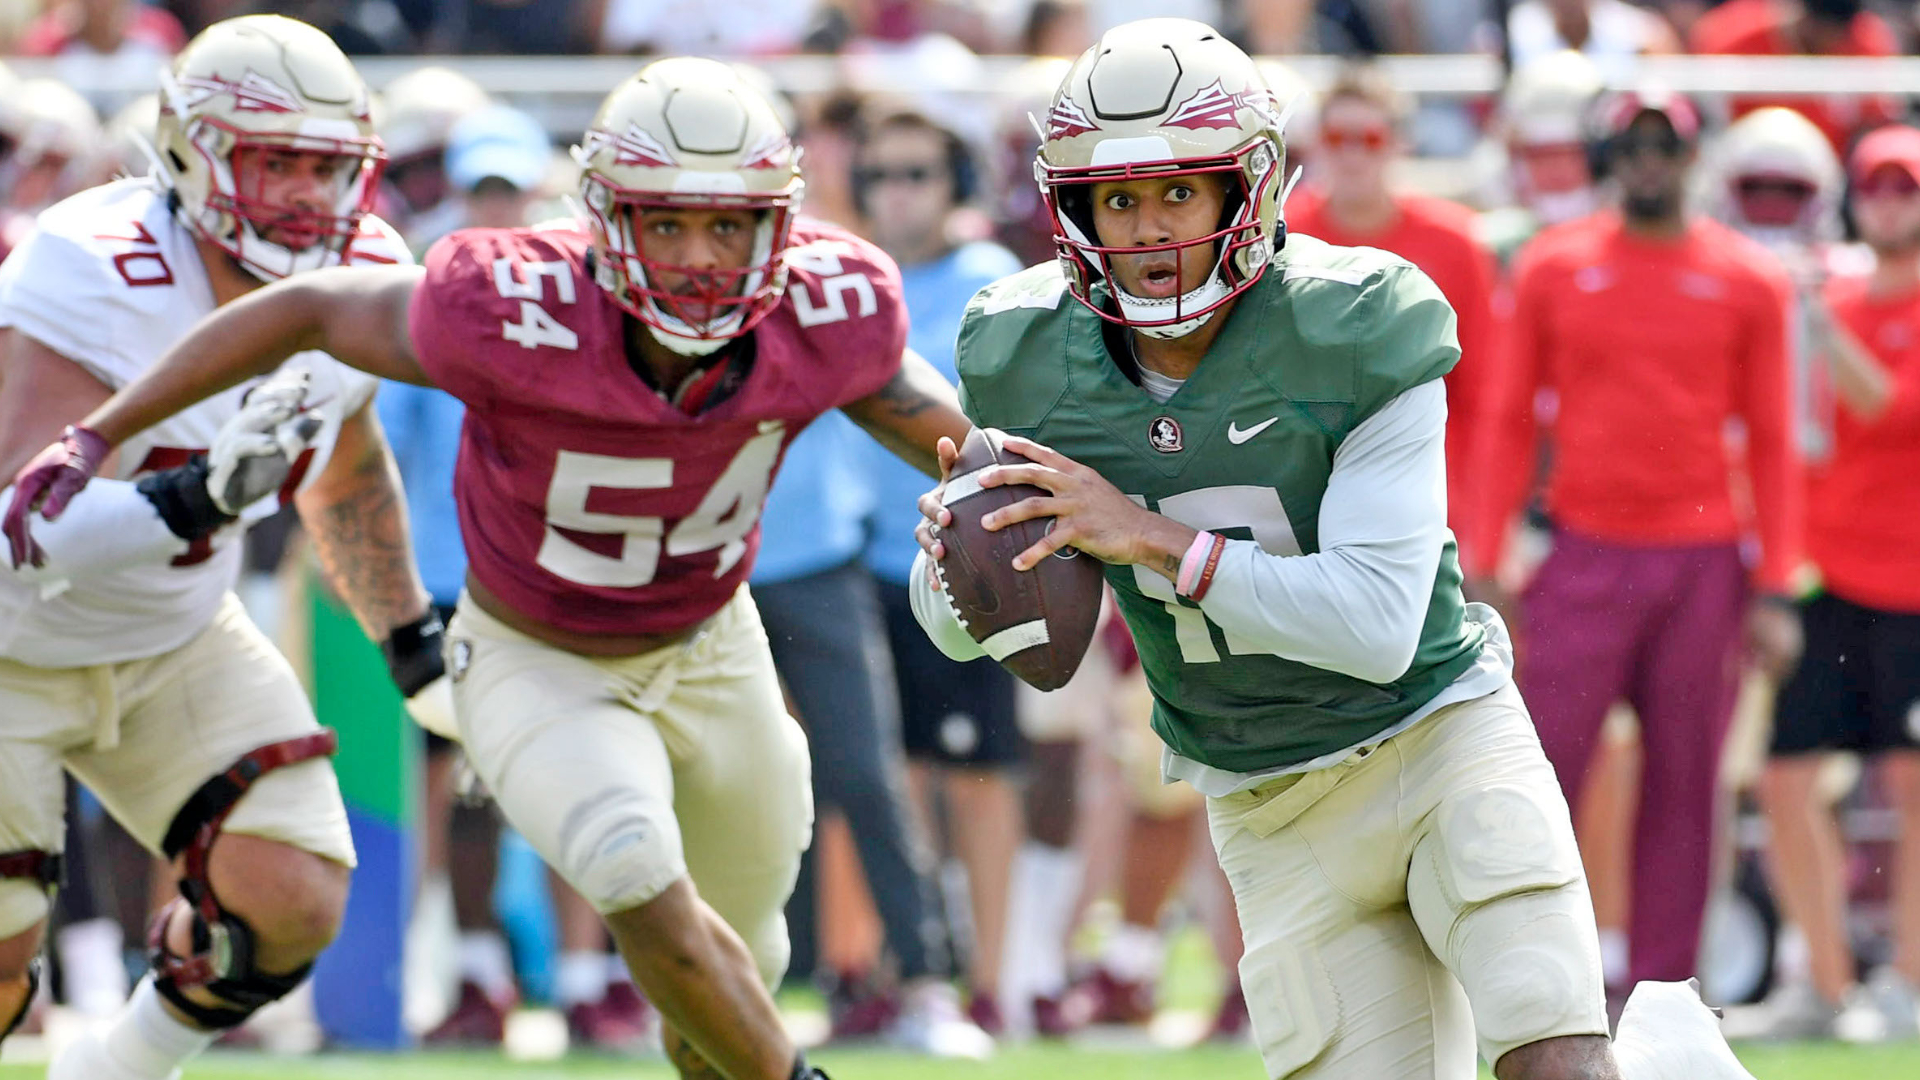 Florida State Revival Among College Football Playoff Bets For 2023
Season